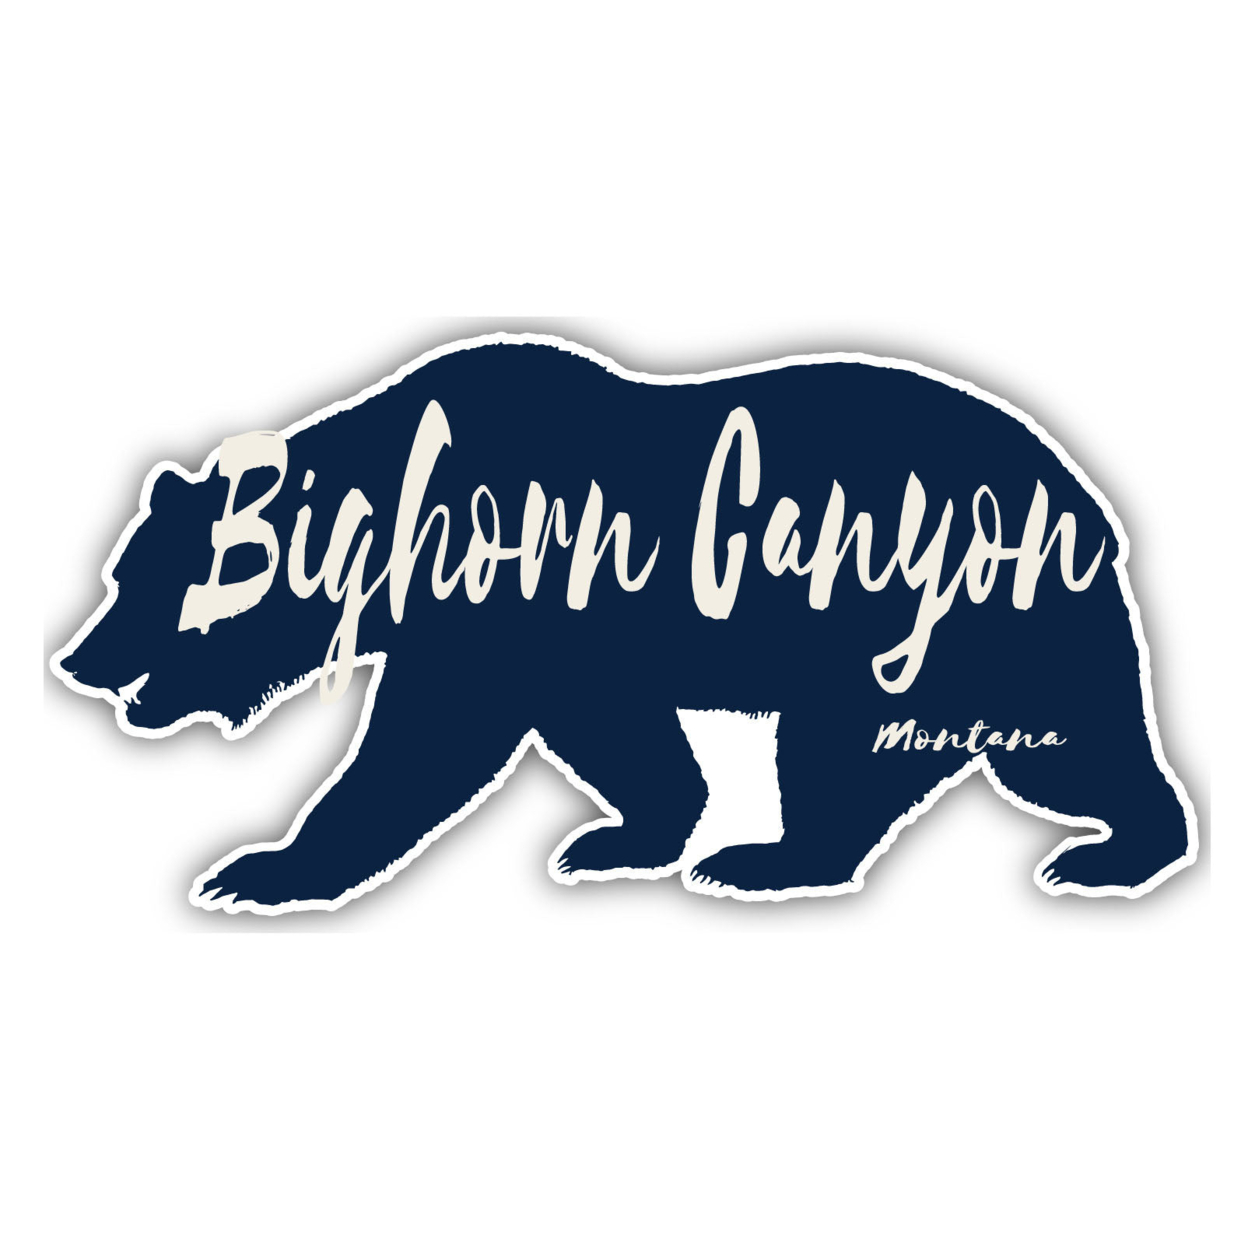 Bighorn Canyon Montana Souvenir Decorative Stickers (Choose Theme And Size) - 4-Pack, 2-Inch, Bear